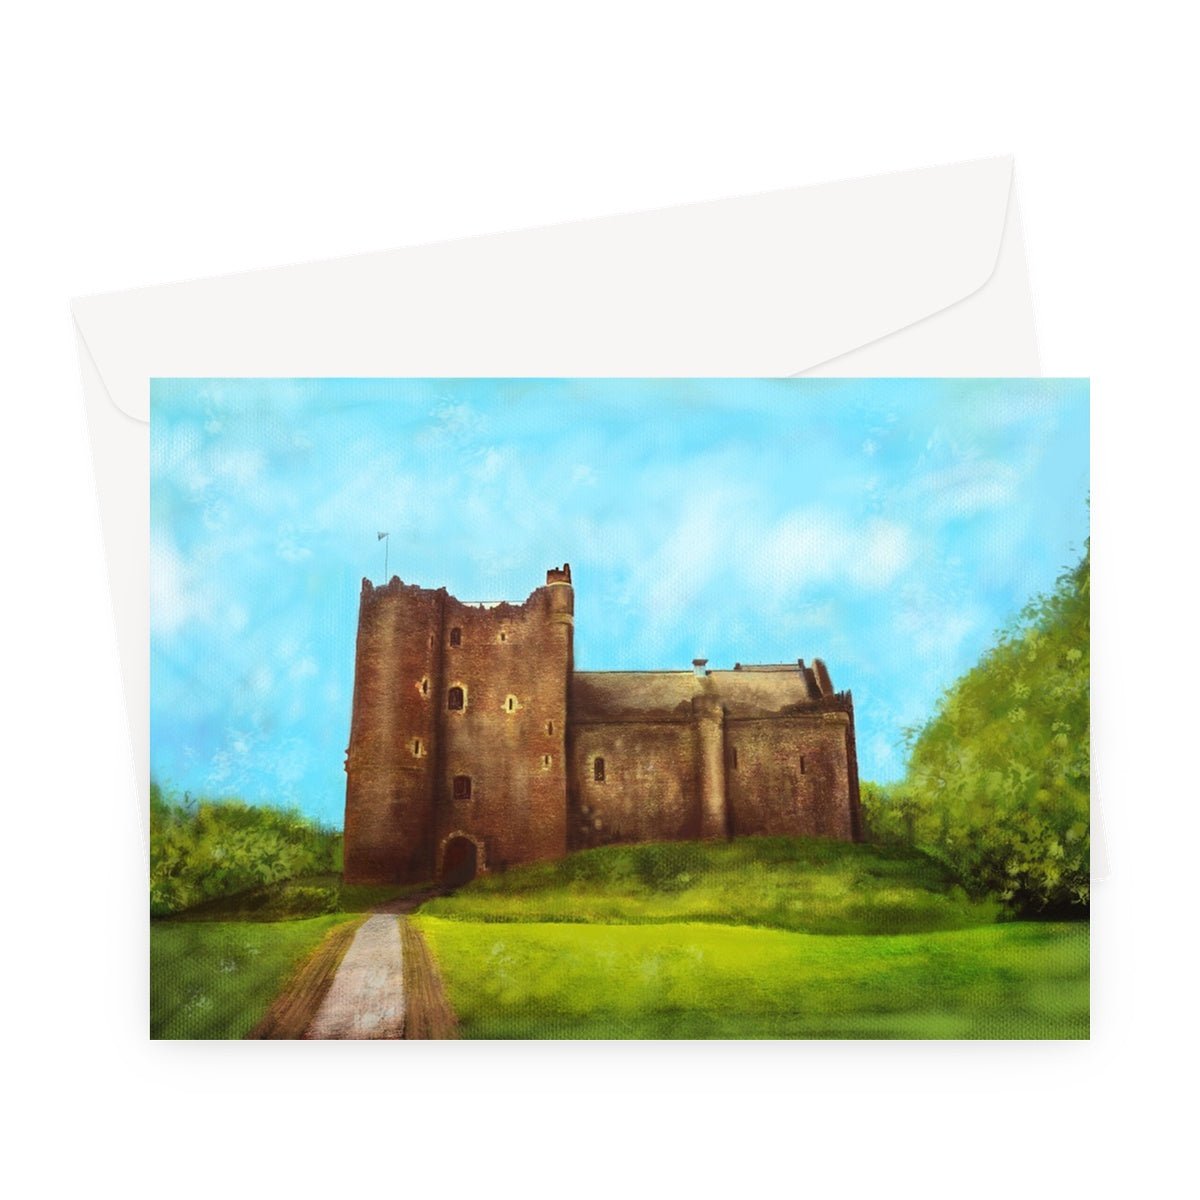 Doune Castle Art Gifts Greeting Card-Greetings Cards-Scottish Castles Art Gallery-A5 Landscape-1 Card-Paintings, Prints, Homeware, Art Gifts From Scotland By Scottish Artist Kevin Hunter